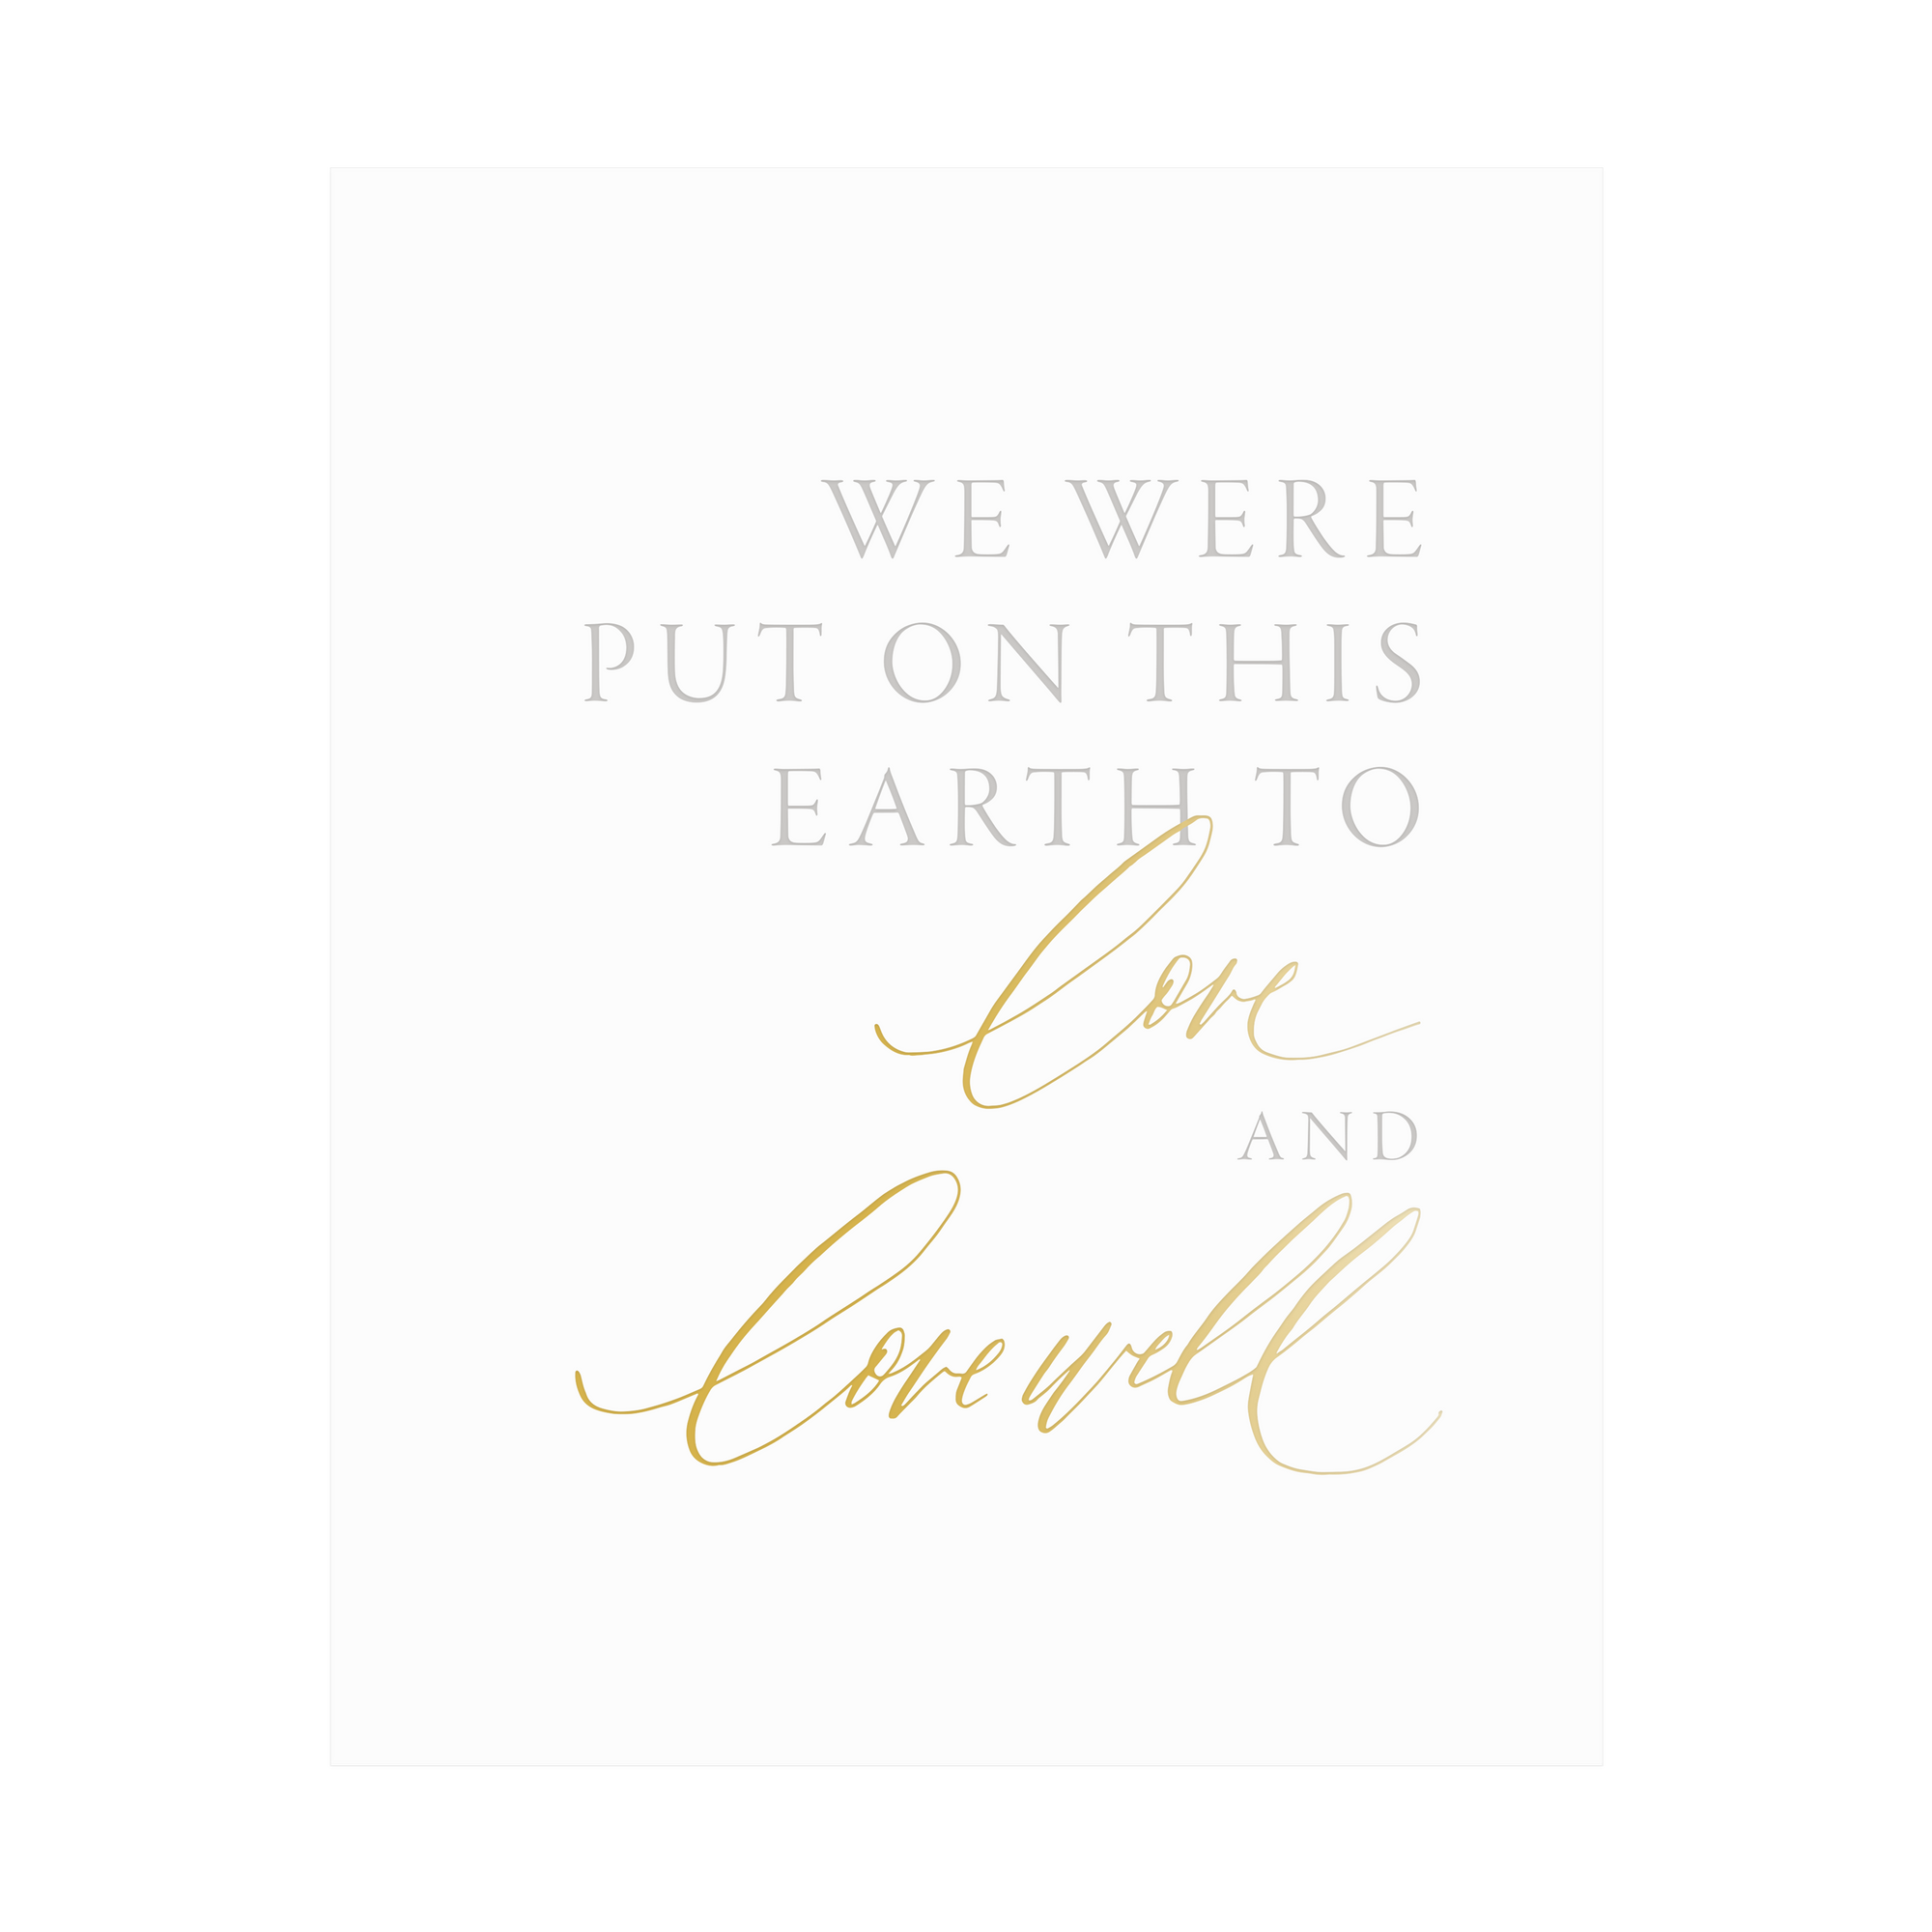 "Love and Love Well" Art Print, letterpress printed by hand in pale grey ink and gold foil.